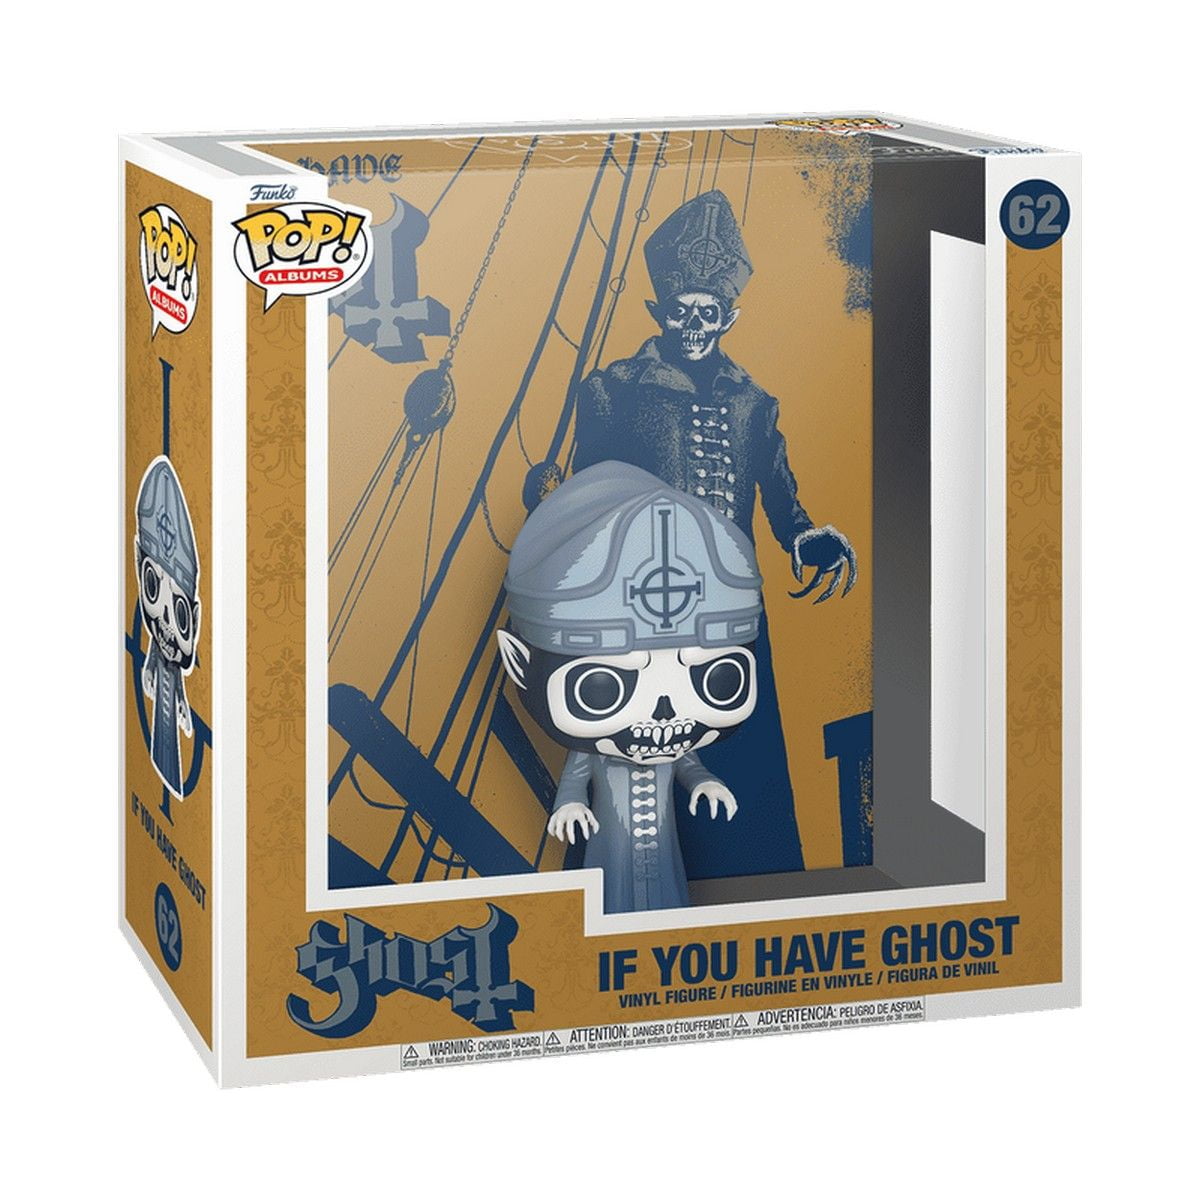 Ghost - If You Have Ghost - Funko POP! Album (62)